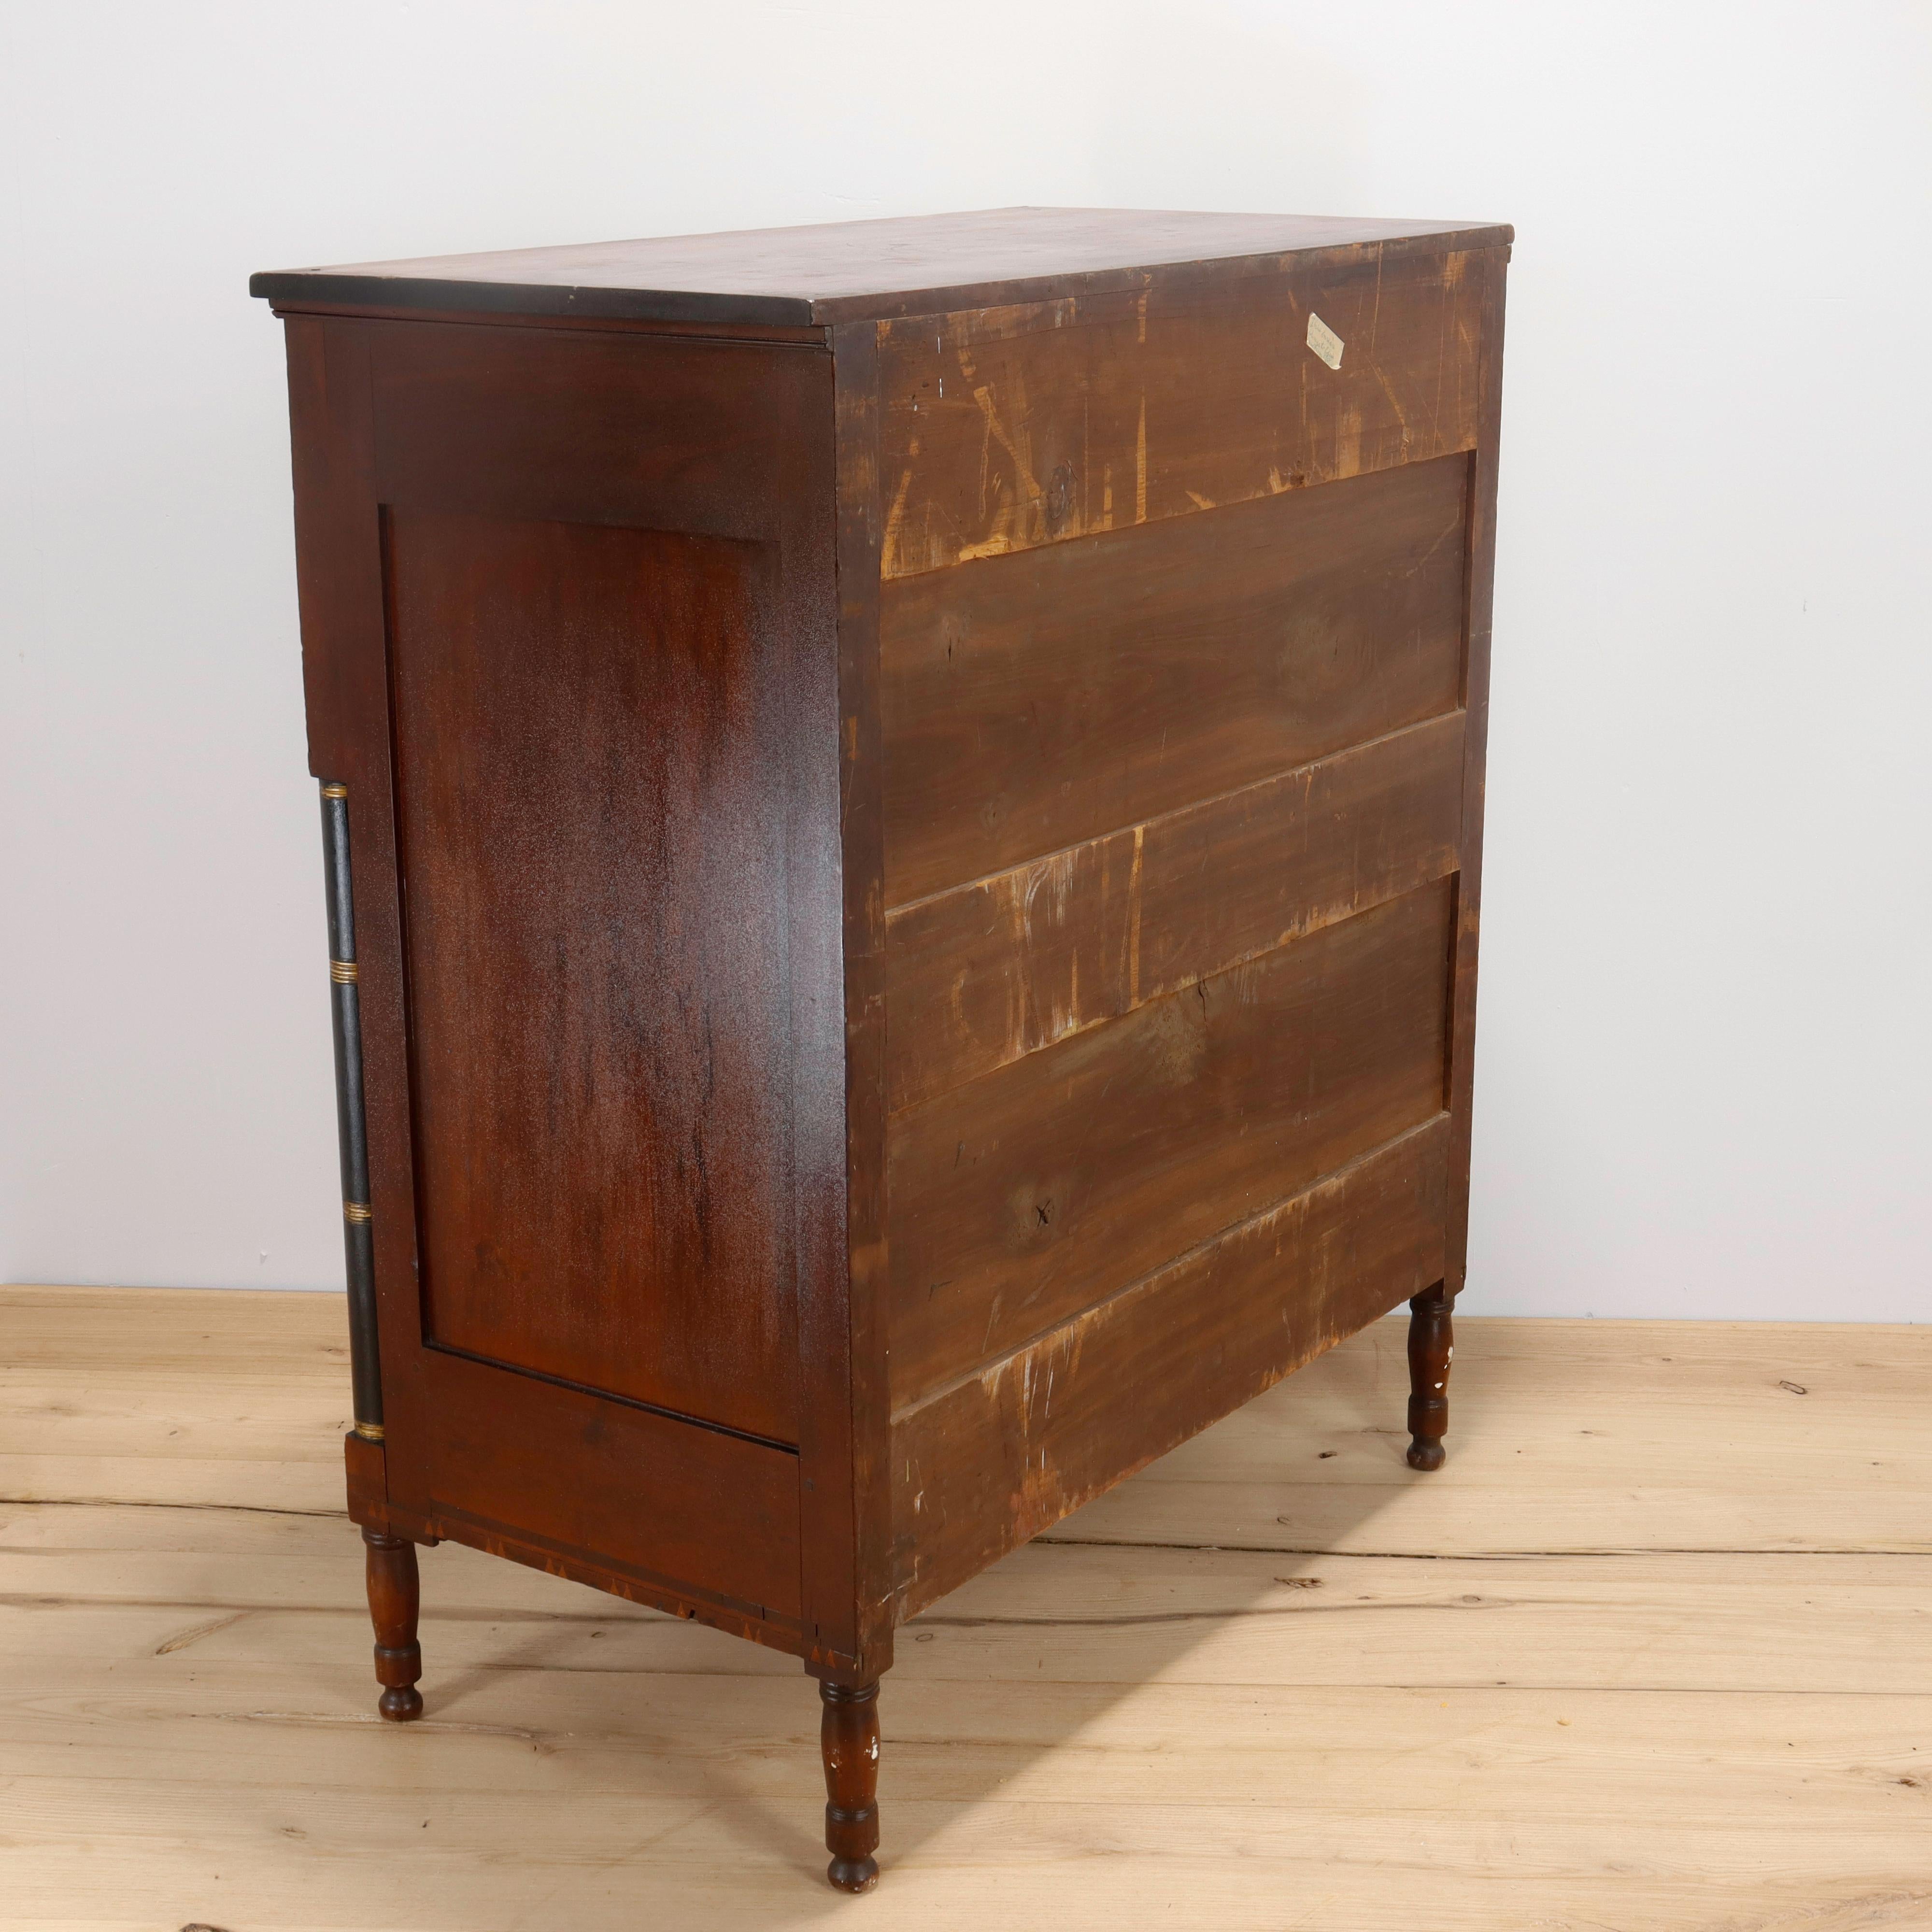 19th Century Pennsylvania Folky Sheraton Cherry Chest of Drawers In Good Condition For Sale In Philadelphia, PA